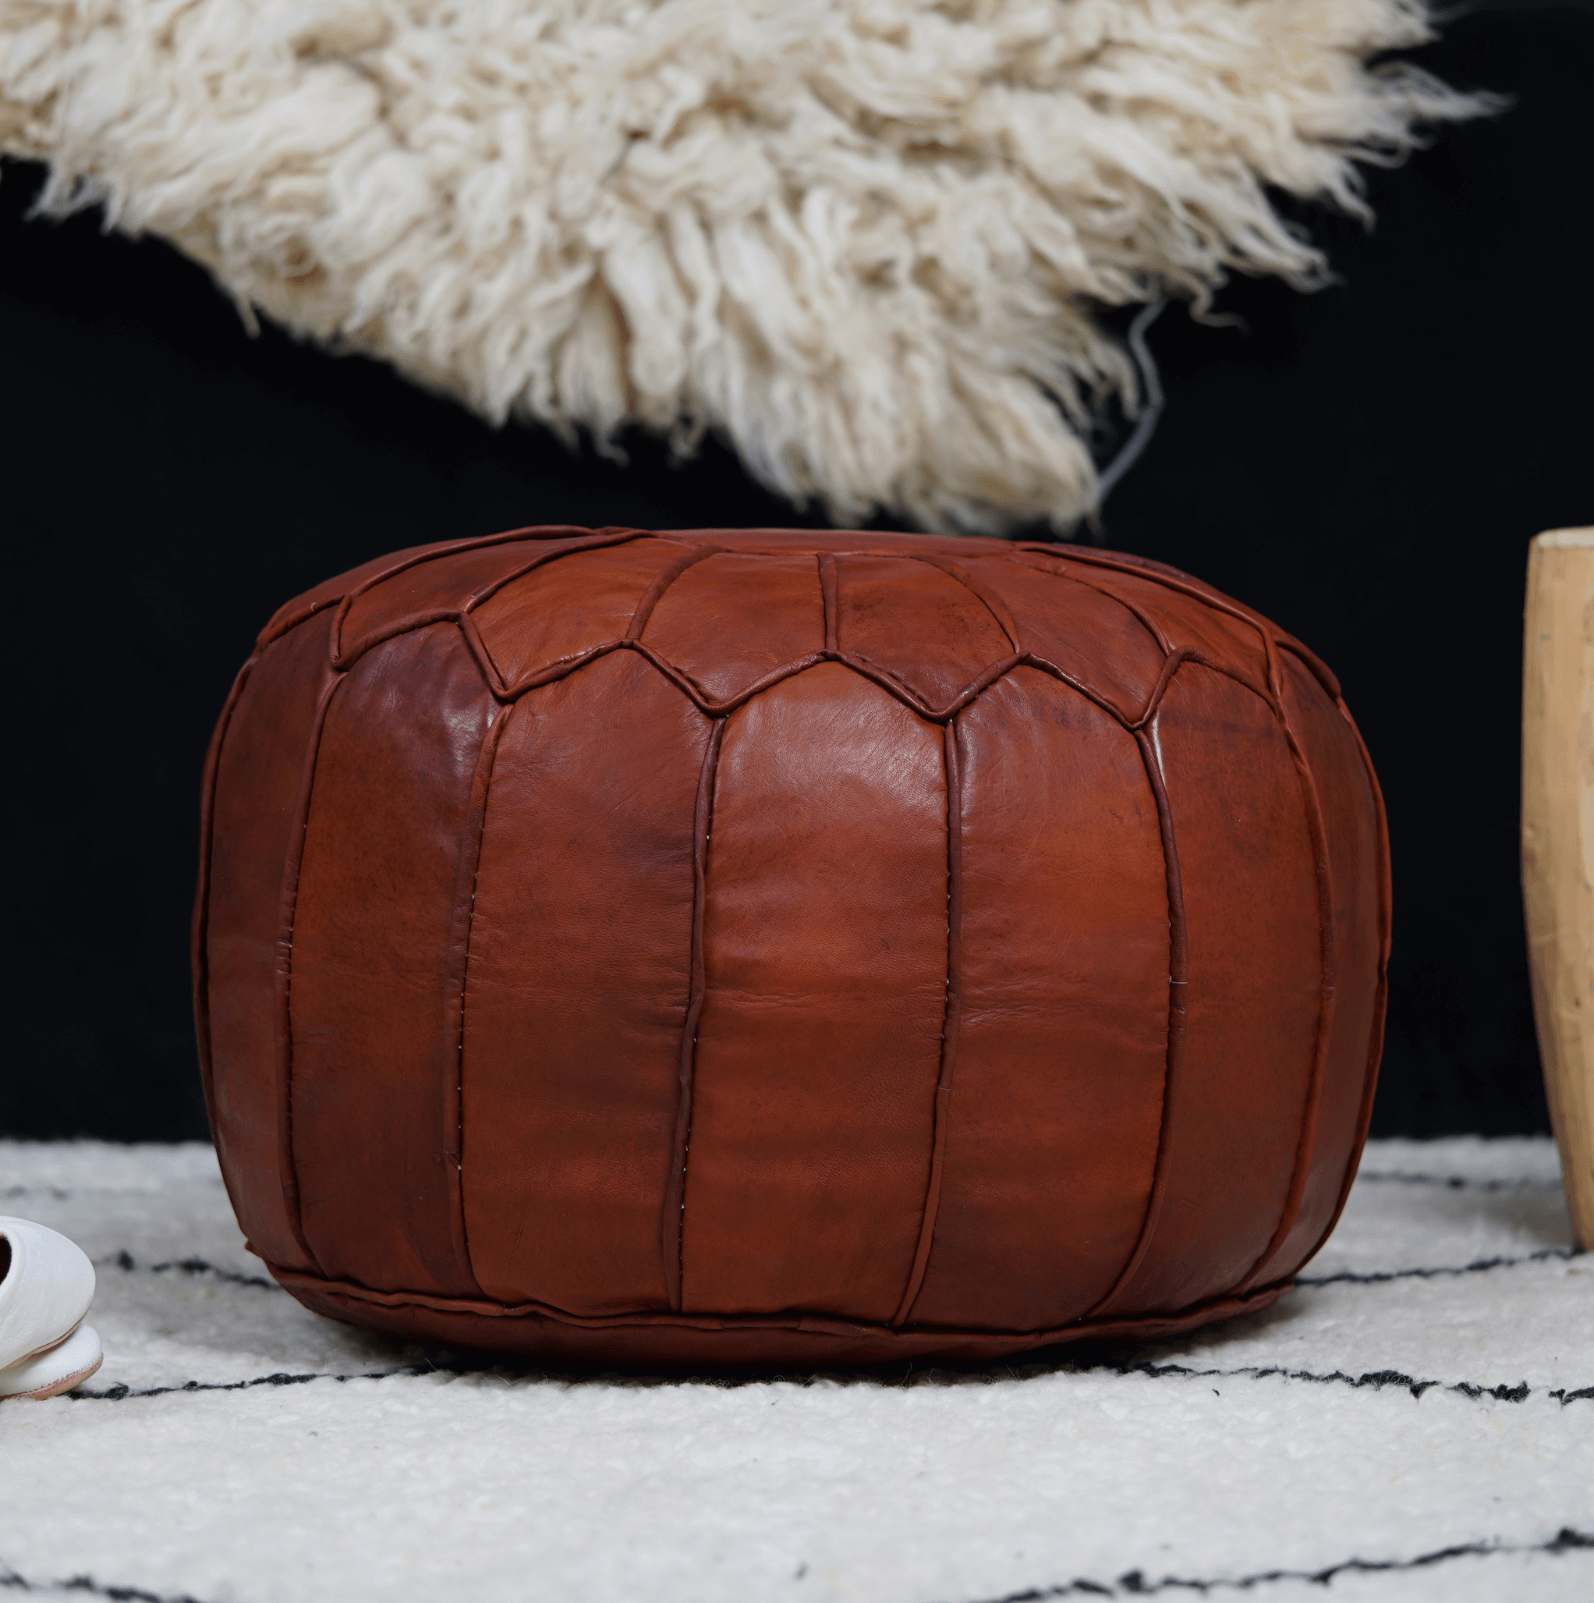 HONEY BROWN MOROCCAN LEATHER POUF